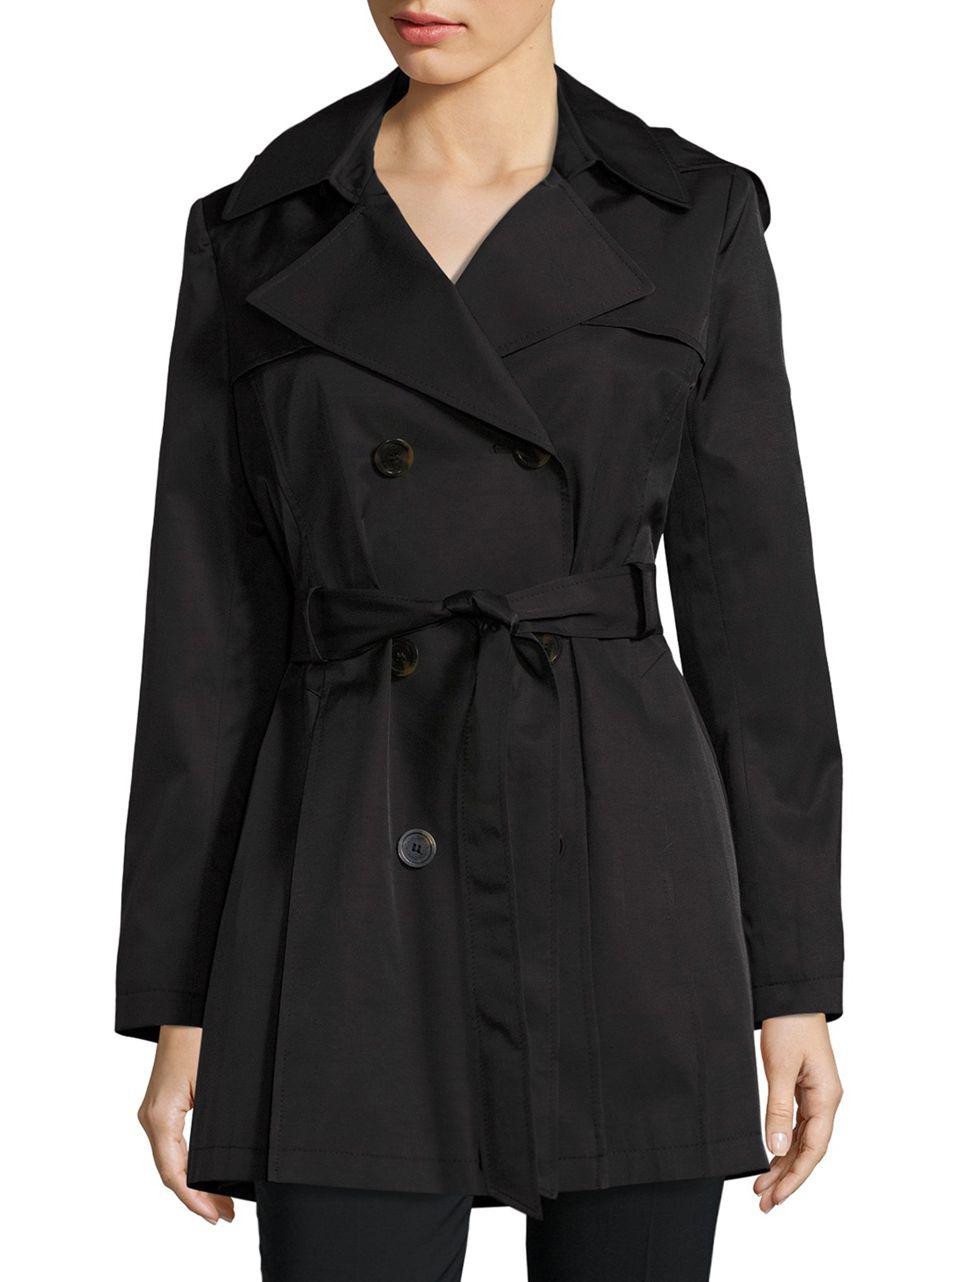 Lyst - Via Spiga Double Breasted Trench Coat in Black